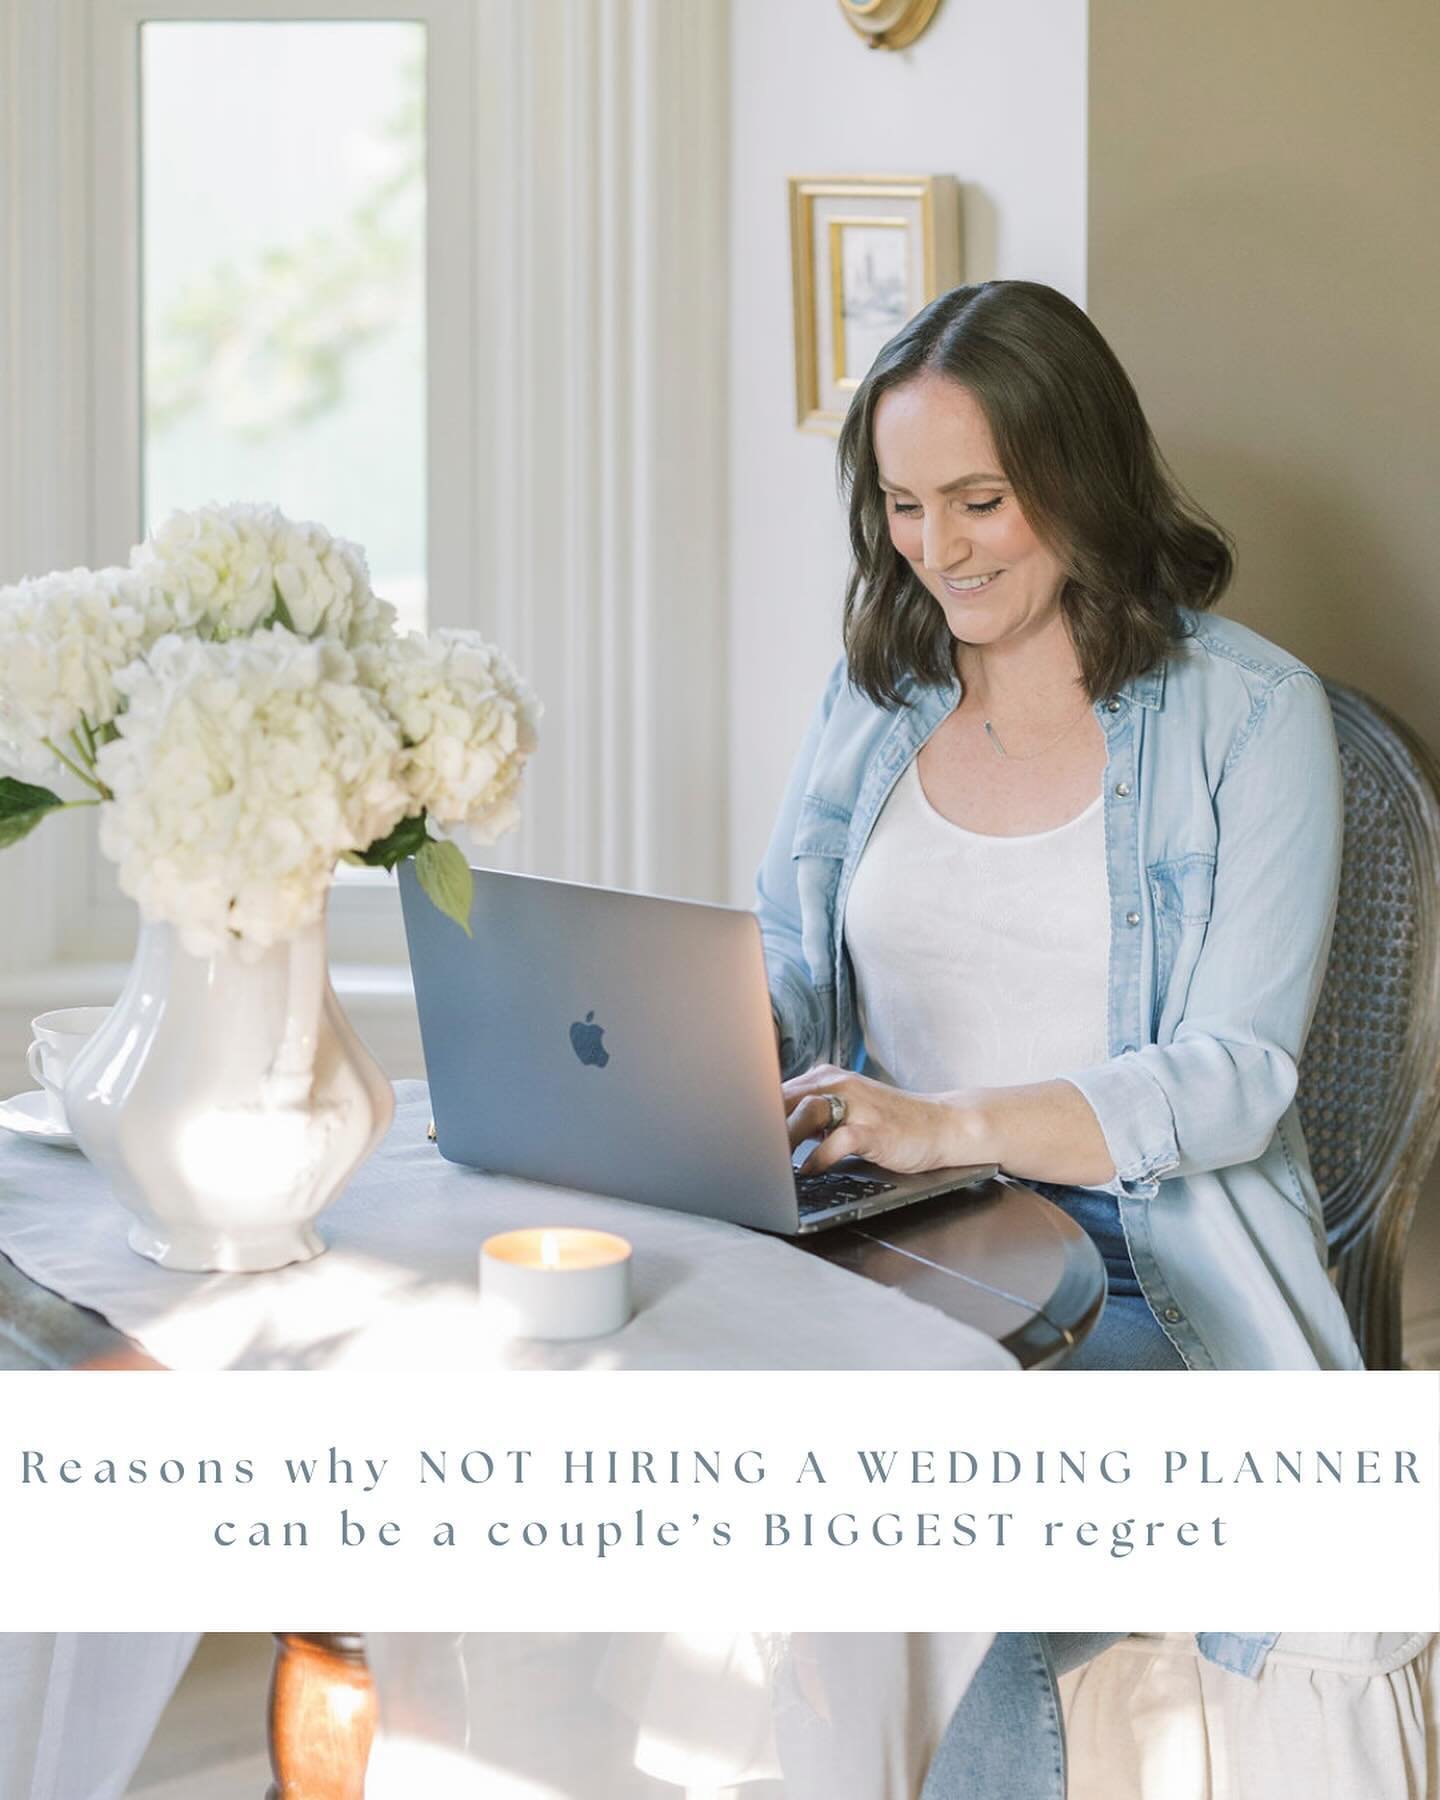 Continuing from yesterday&rsquo;s post and sharing another big regret from couples, one I hear a lot - that they wished they understood the importance and value behind hiring a wedding planner...OR that they booked a smaller service with a planner an